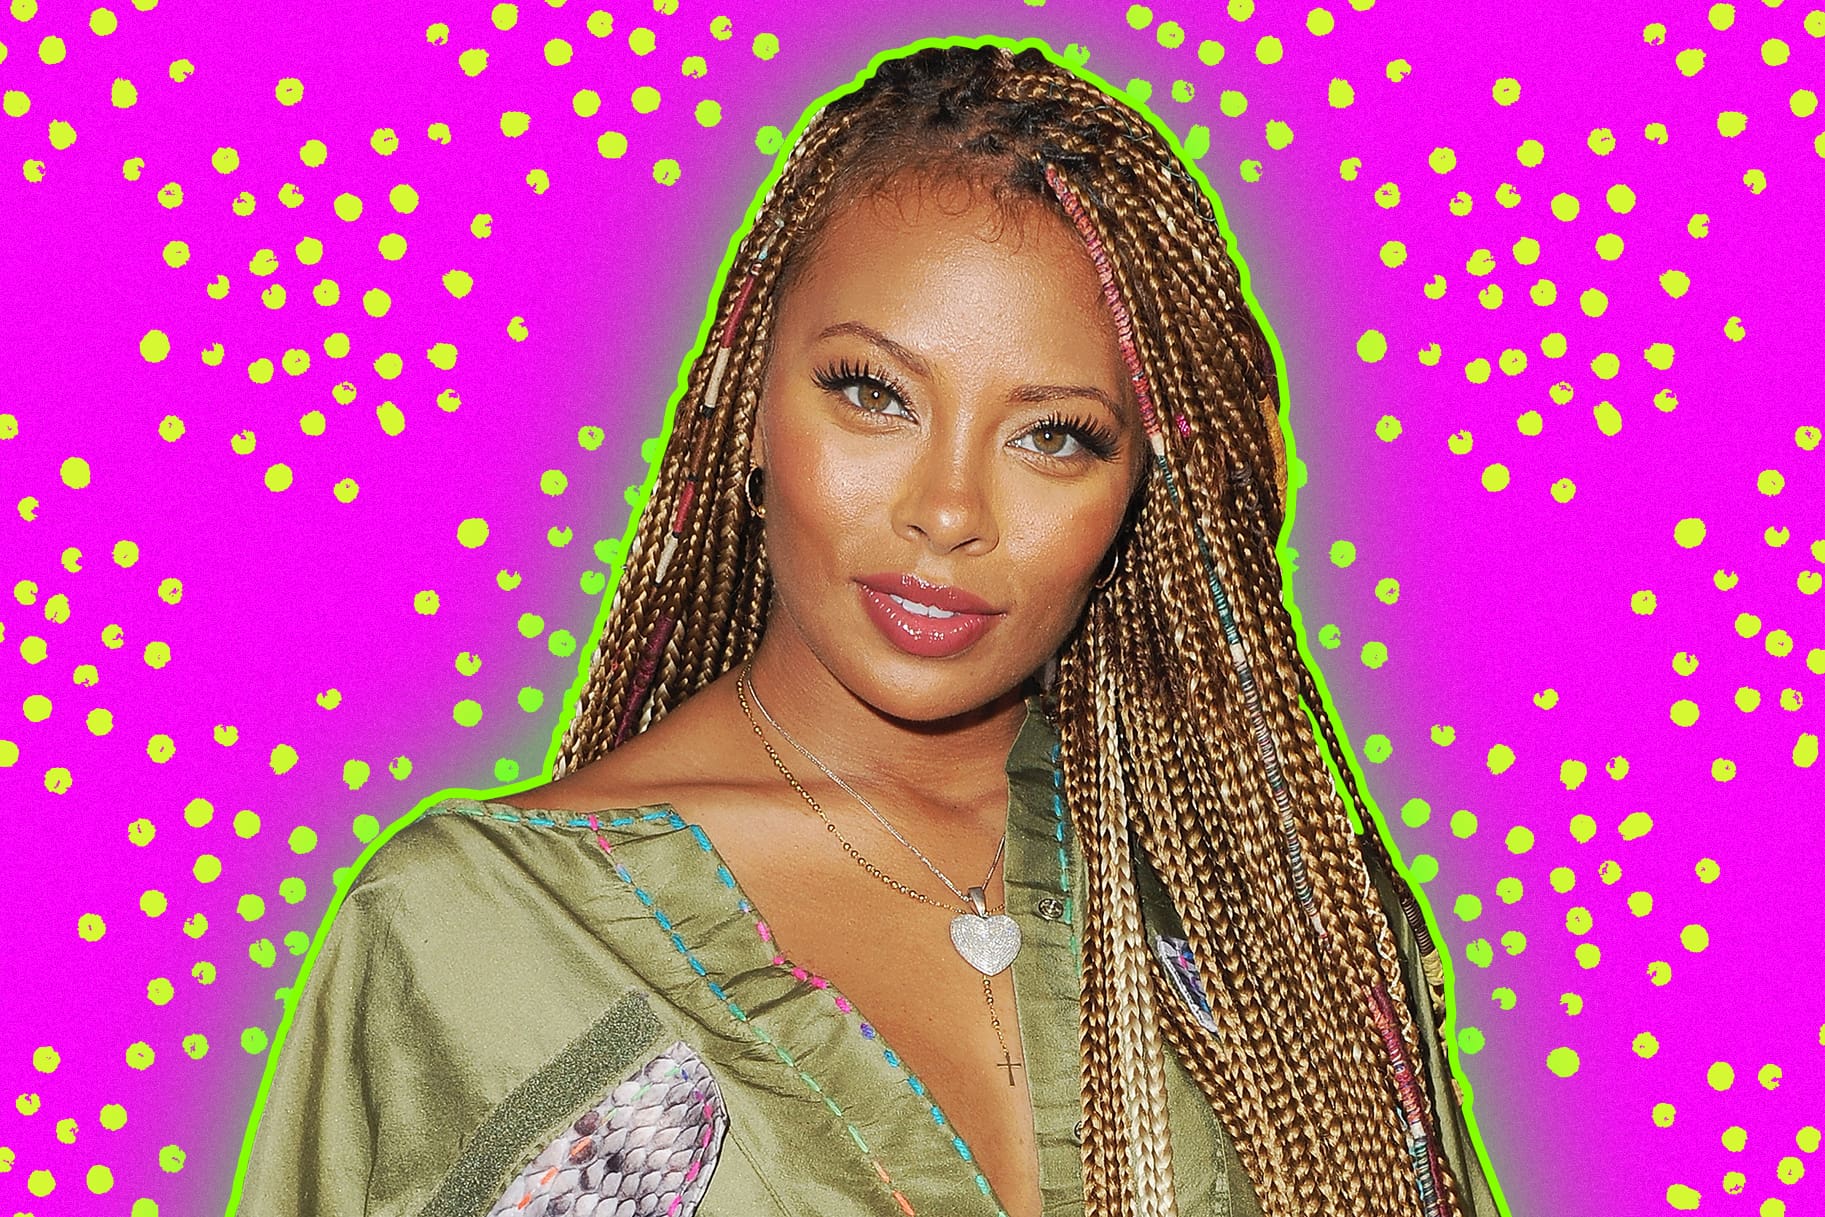 Eva Marcille's Fans Adore Her Morning Look - See The Video